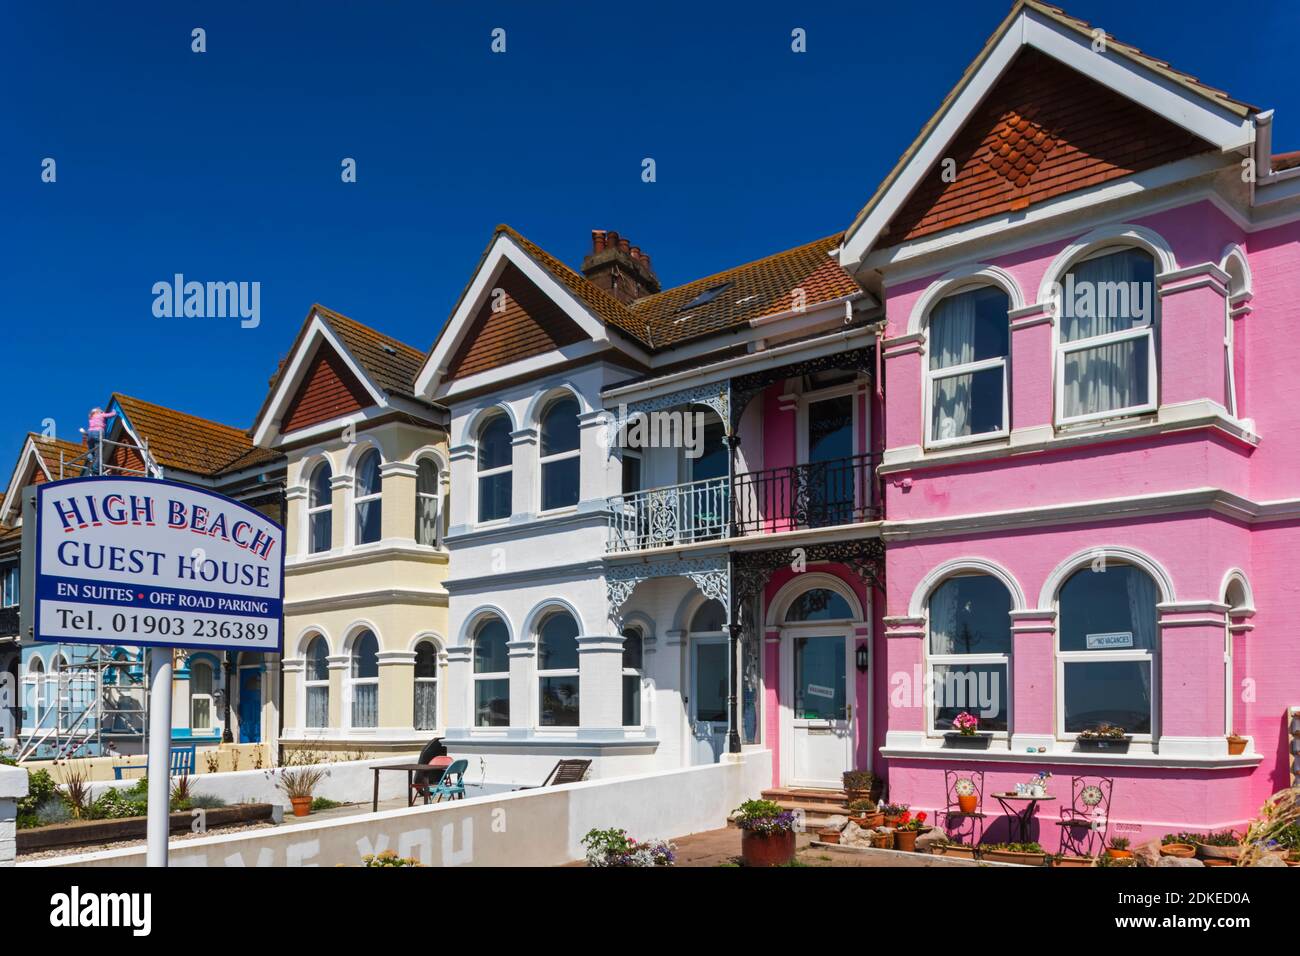 England, West Sussex, Worthing, Colourful Seafront Bed and Breakfast Accomodation Stock Photo